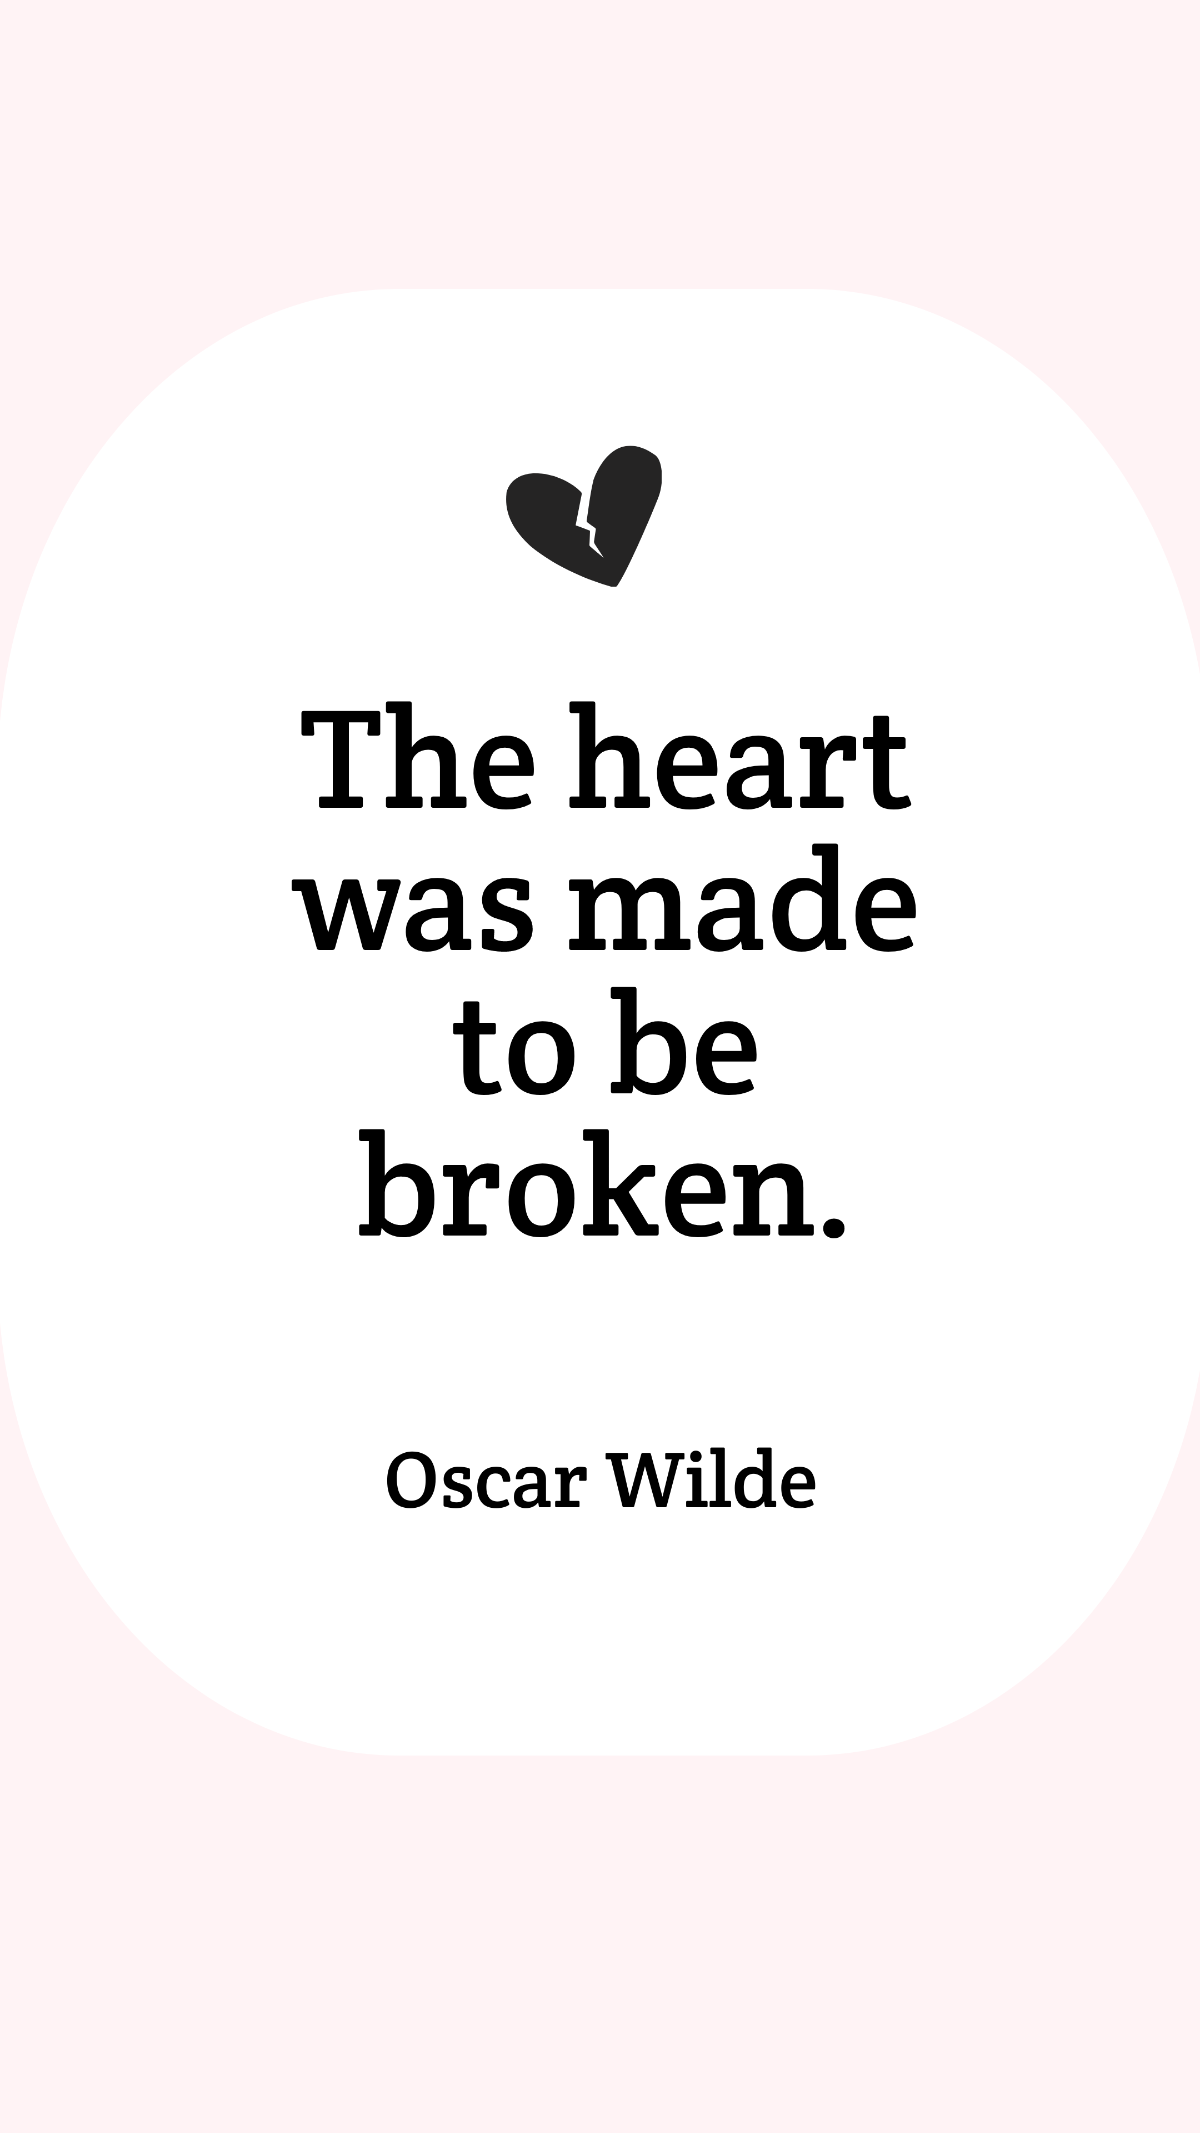 Oscar Wilde - The heart was made to be broken. Template